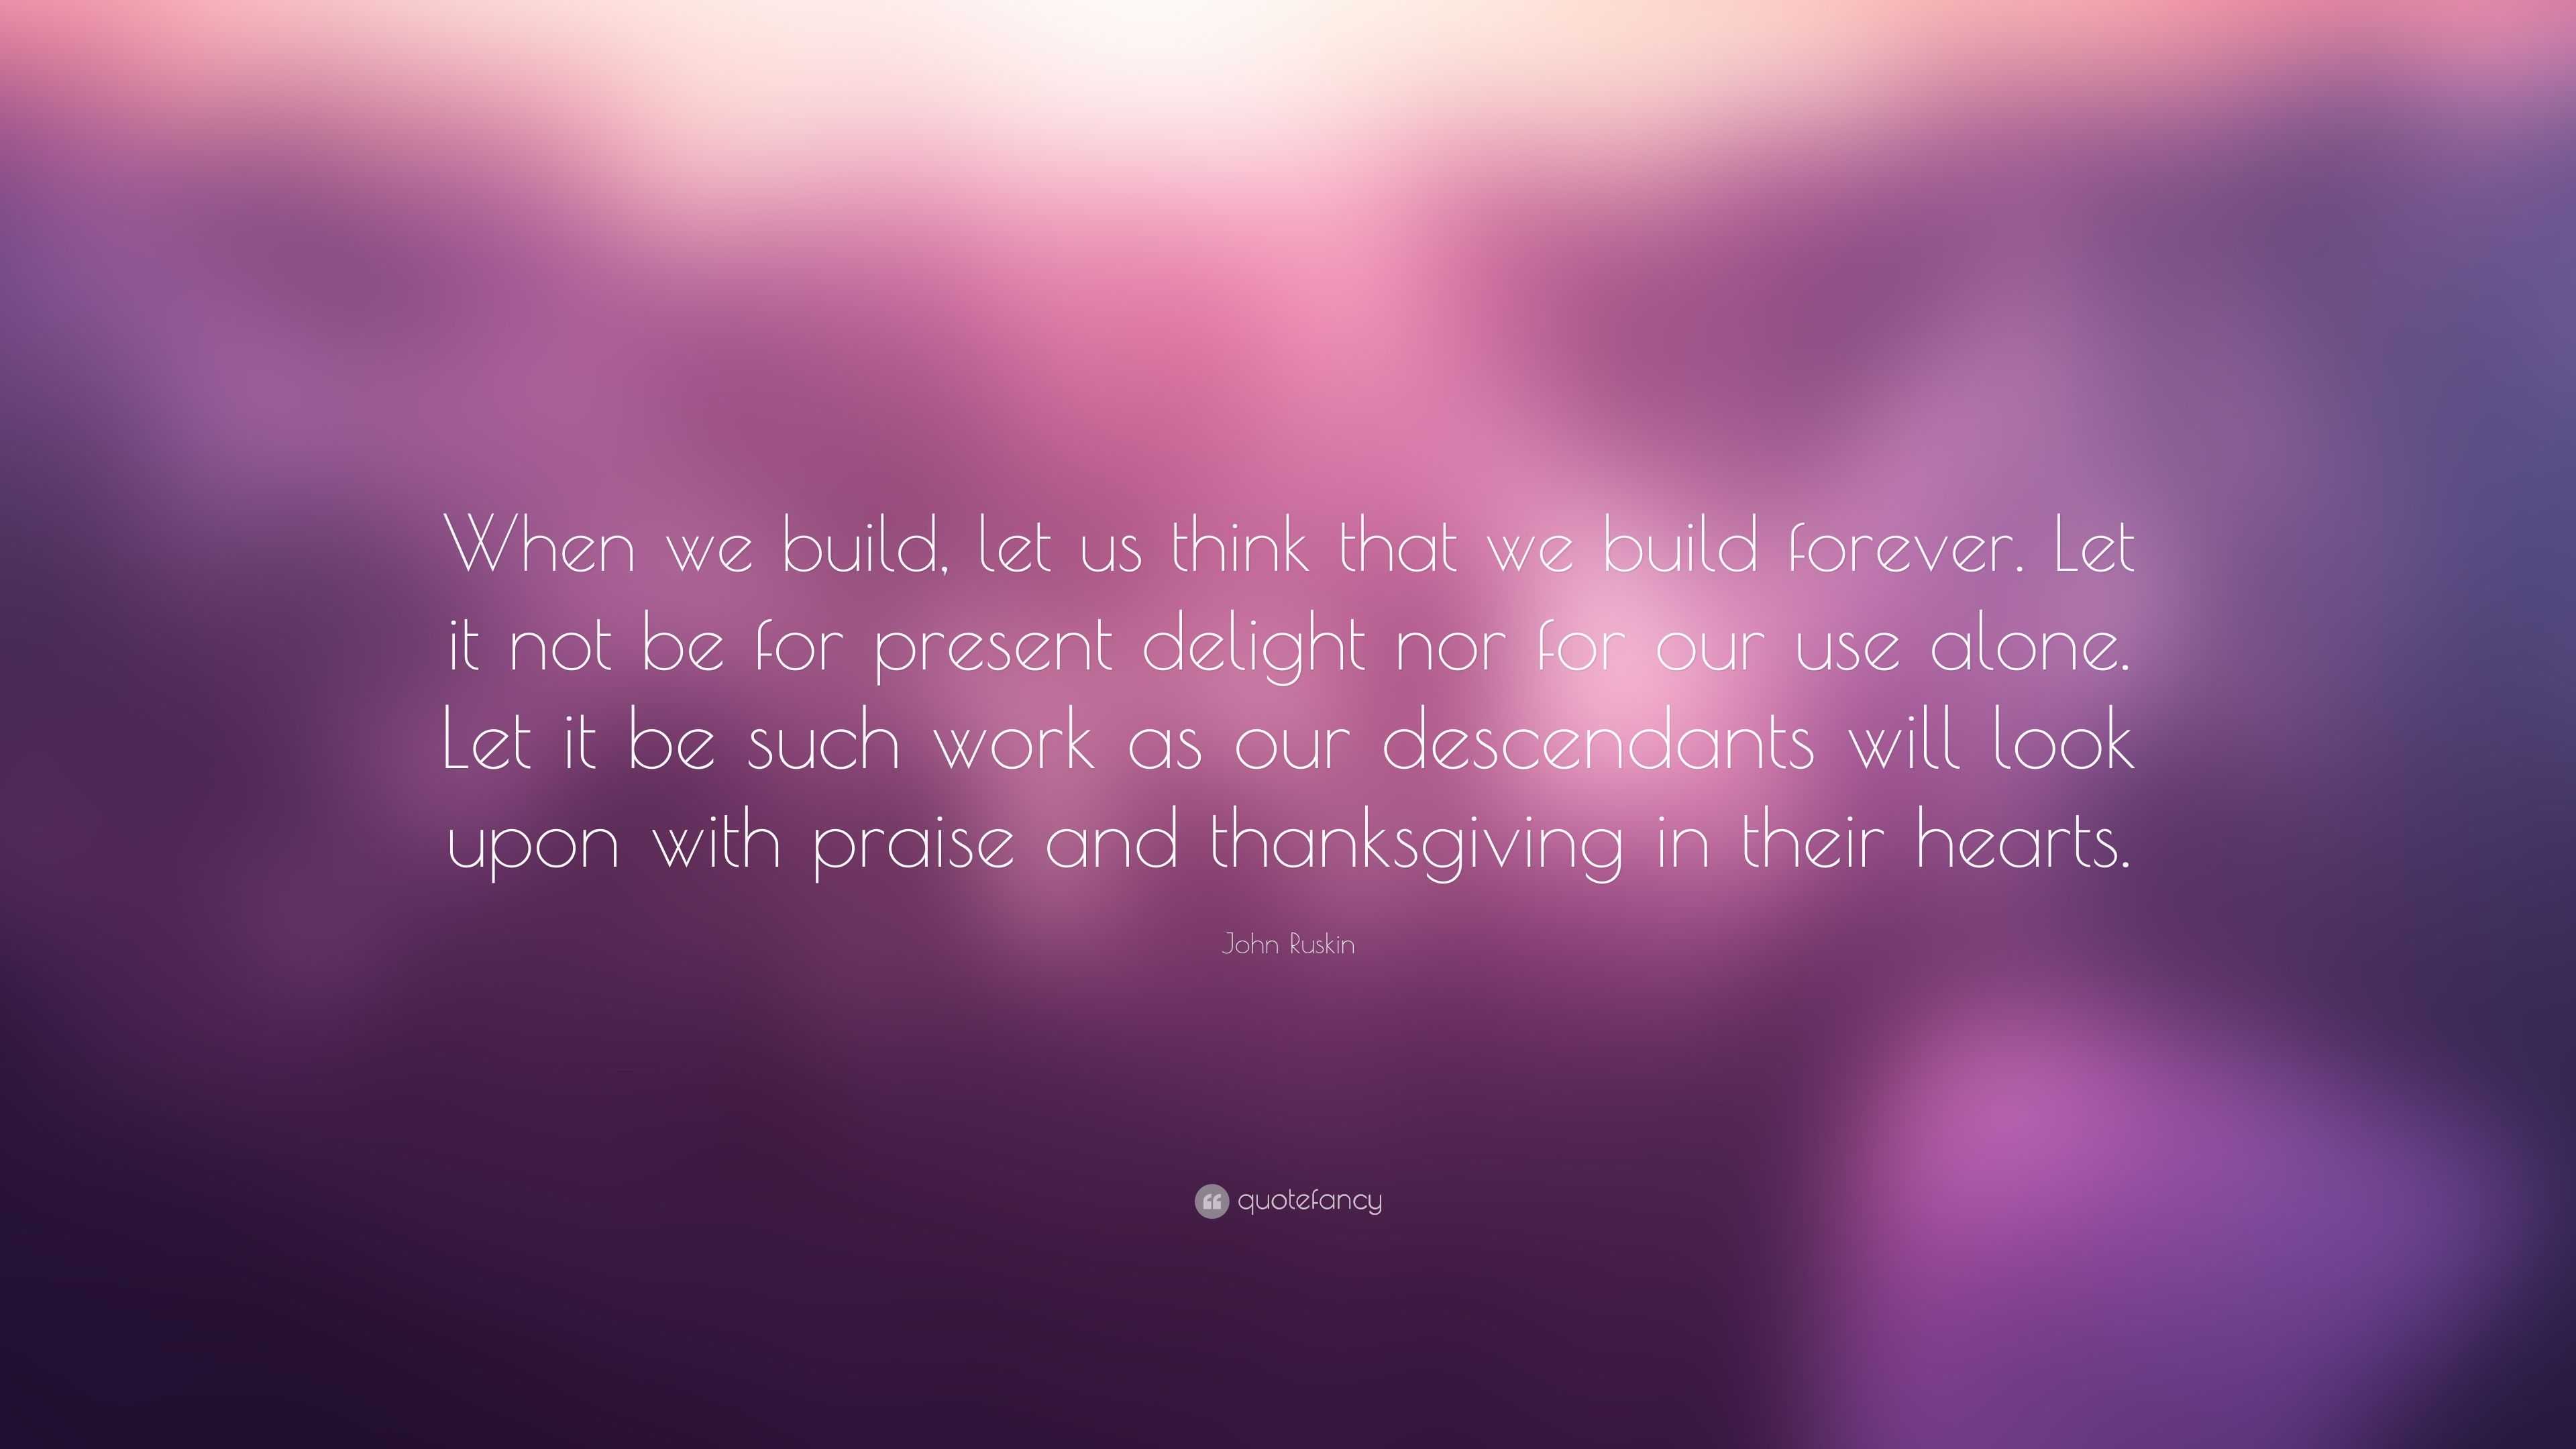 John Ruskin Quote: “When we build, let us think that we build forever ...